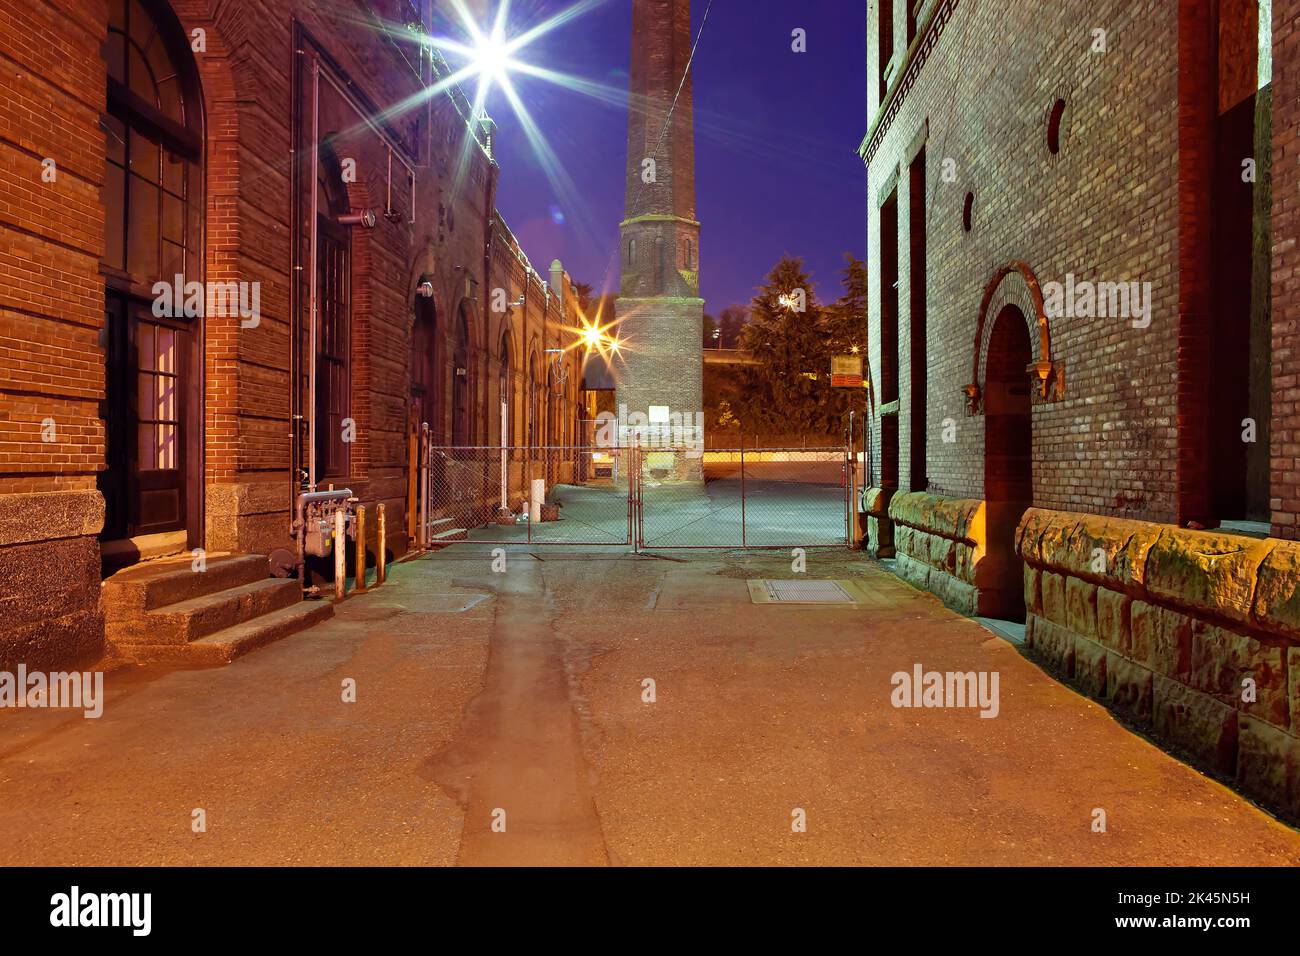 An alleyway in Georgetown, Seattle at night, renovated dockyard buildings, and a tower, gates and security lights. Stock Photo